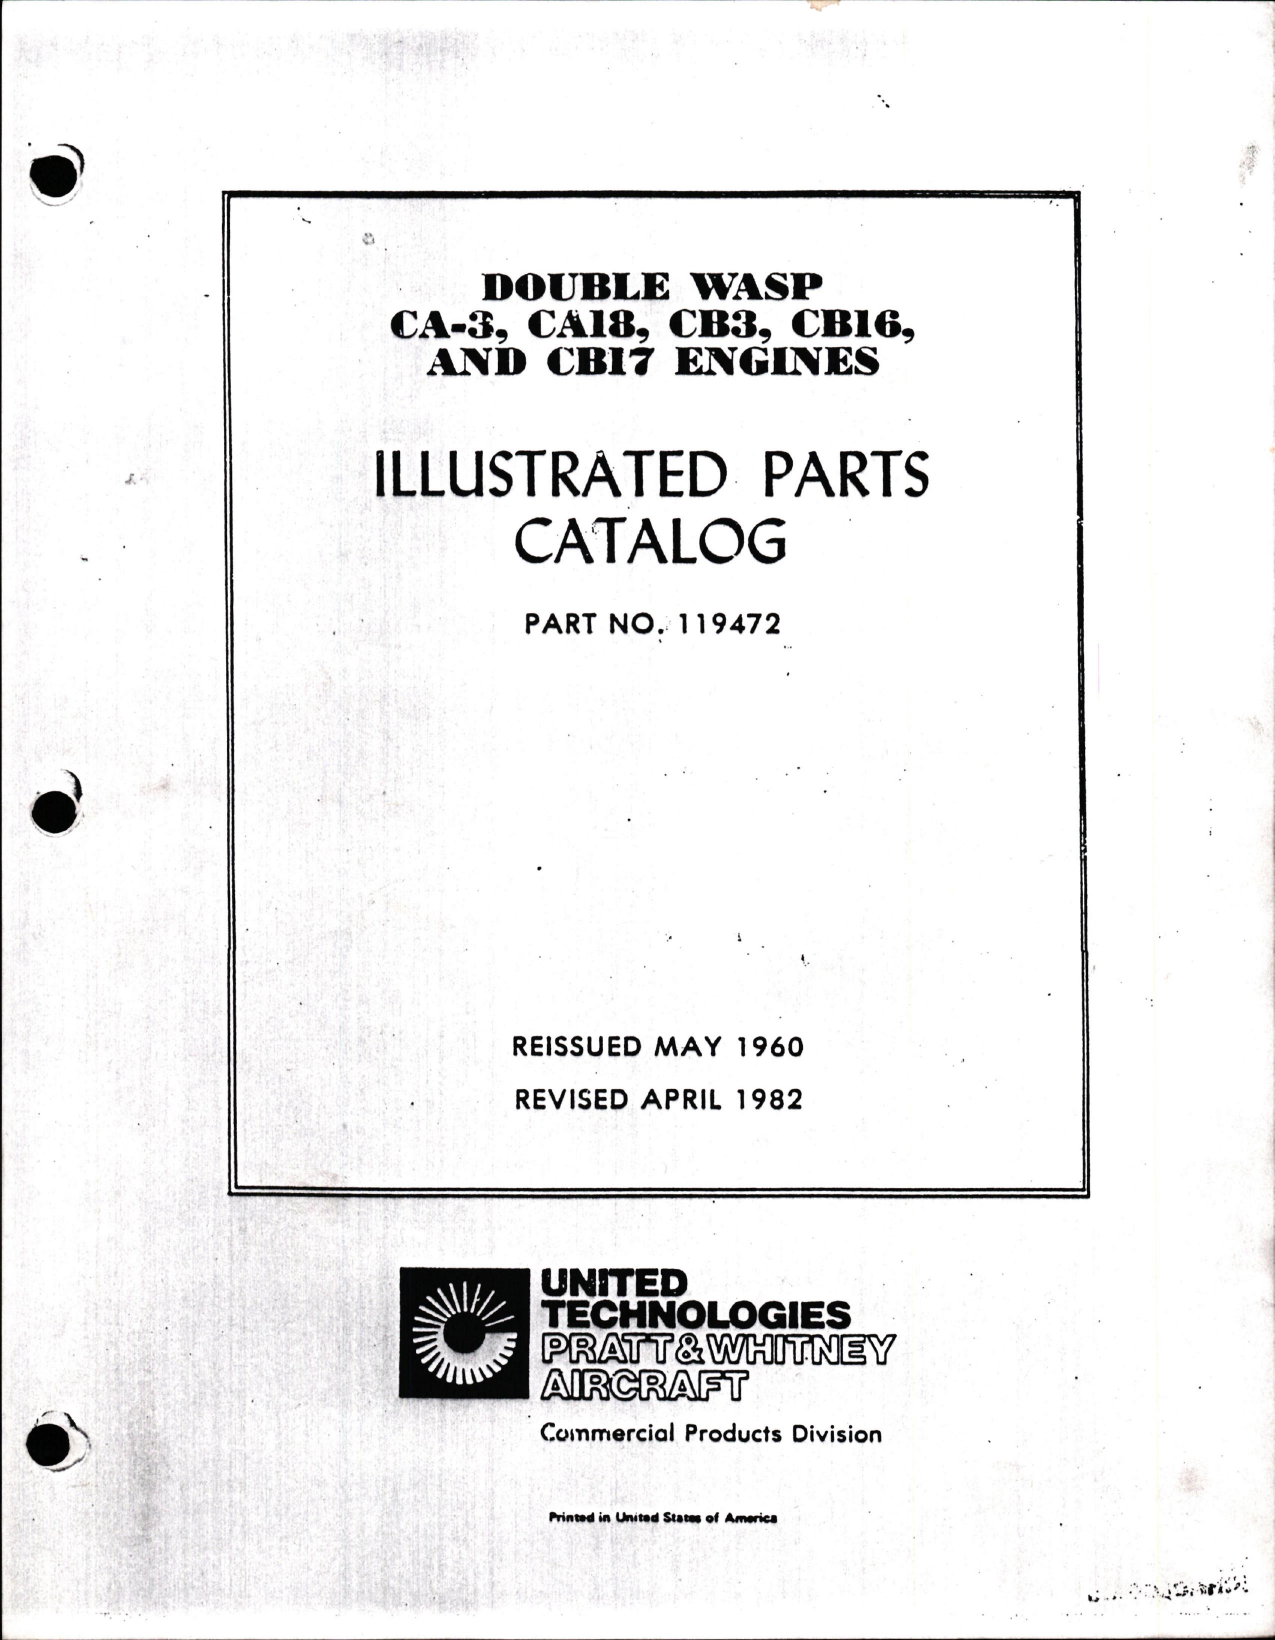 Sample page 1 from AirCorps Library document: Illustrated Parts Catalog for Double Wasp - CA-3, CA18, CB3, CB16, and CB17 Engines